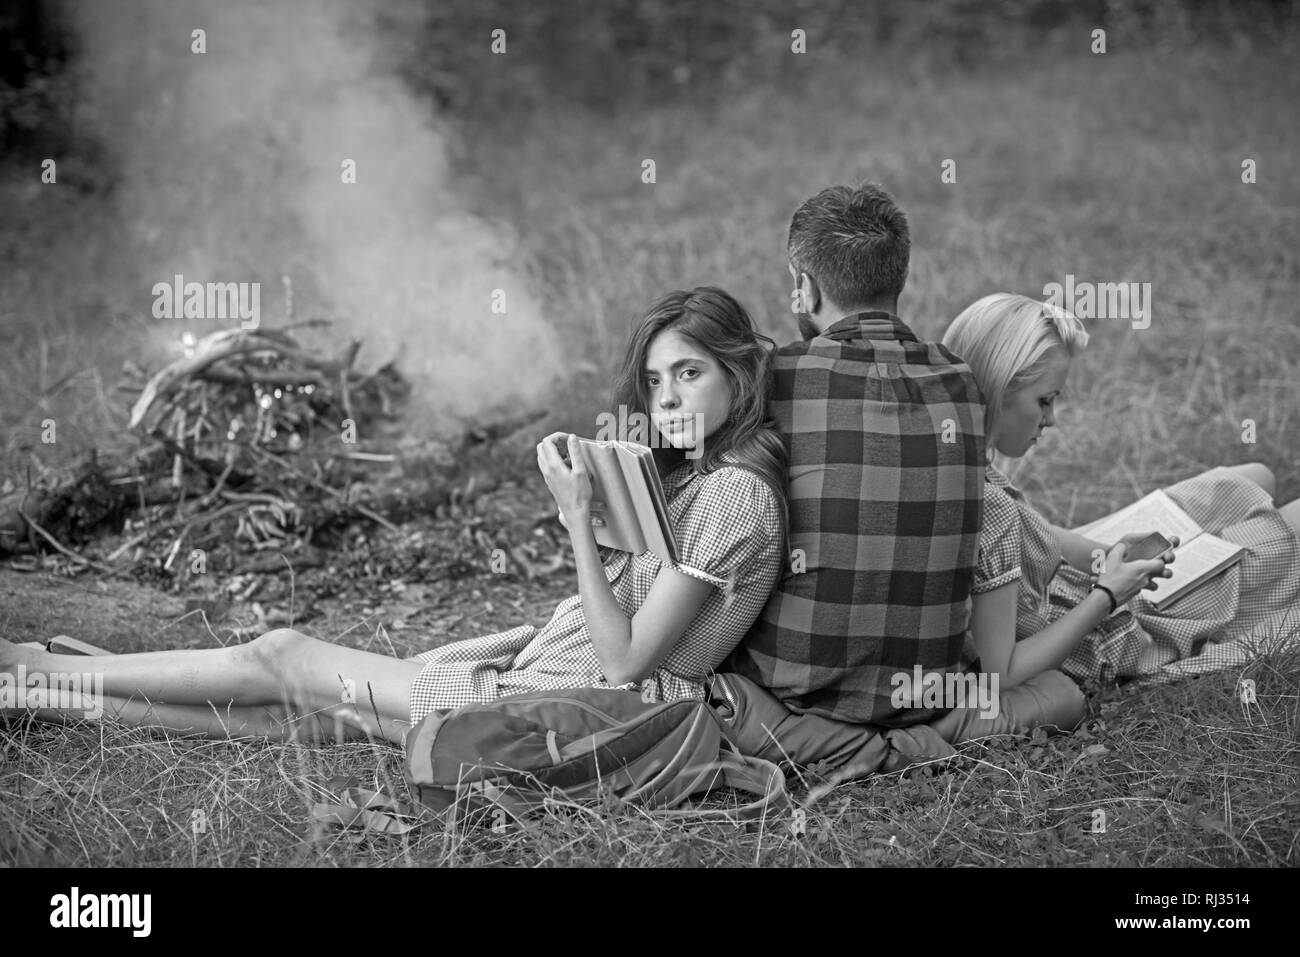 Camping in wilderness. Turn back guy looking at fire while two beautiful girls read book, sustainable education concept Stock Photo